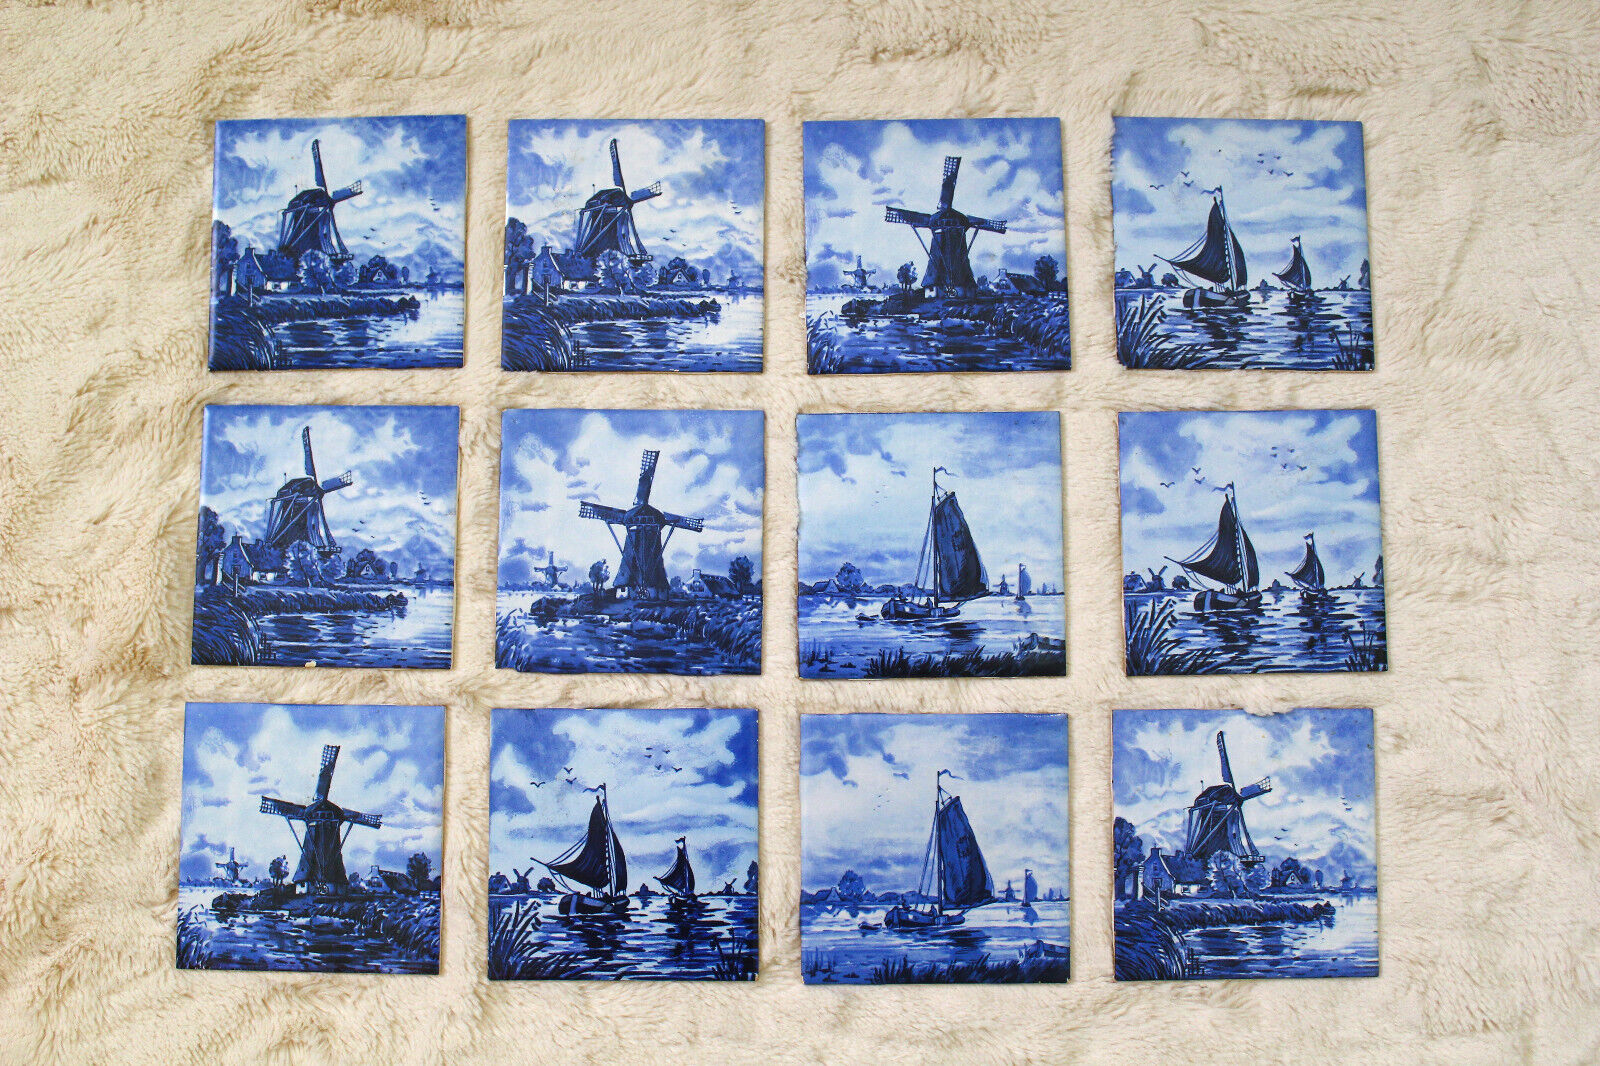 12 Blue H. & R. Johnson Windmill Waterfront Made England Ceramic Tile 4x4Holland